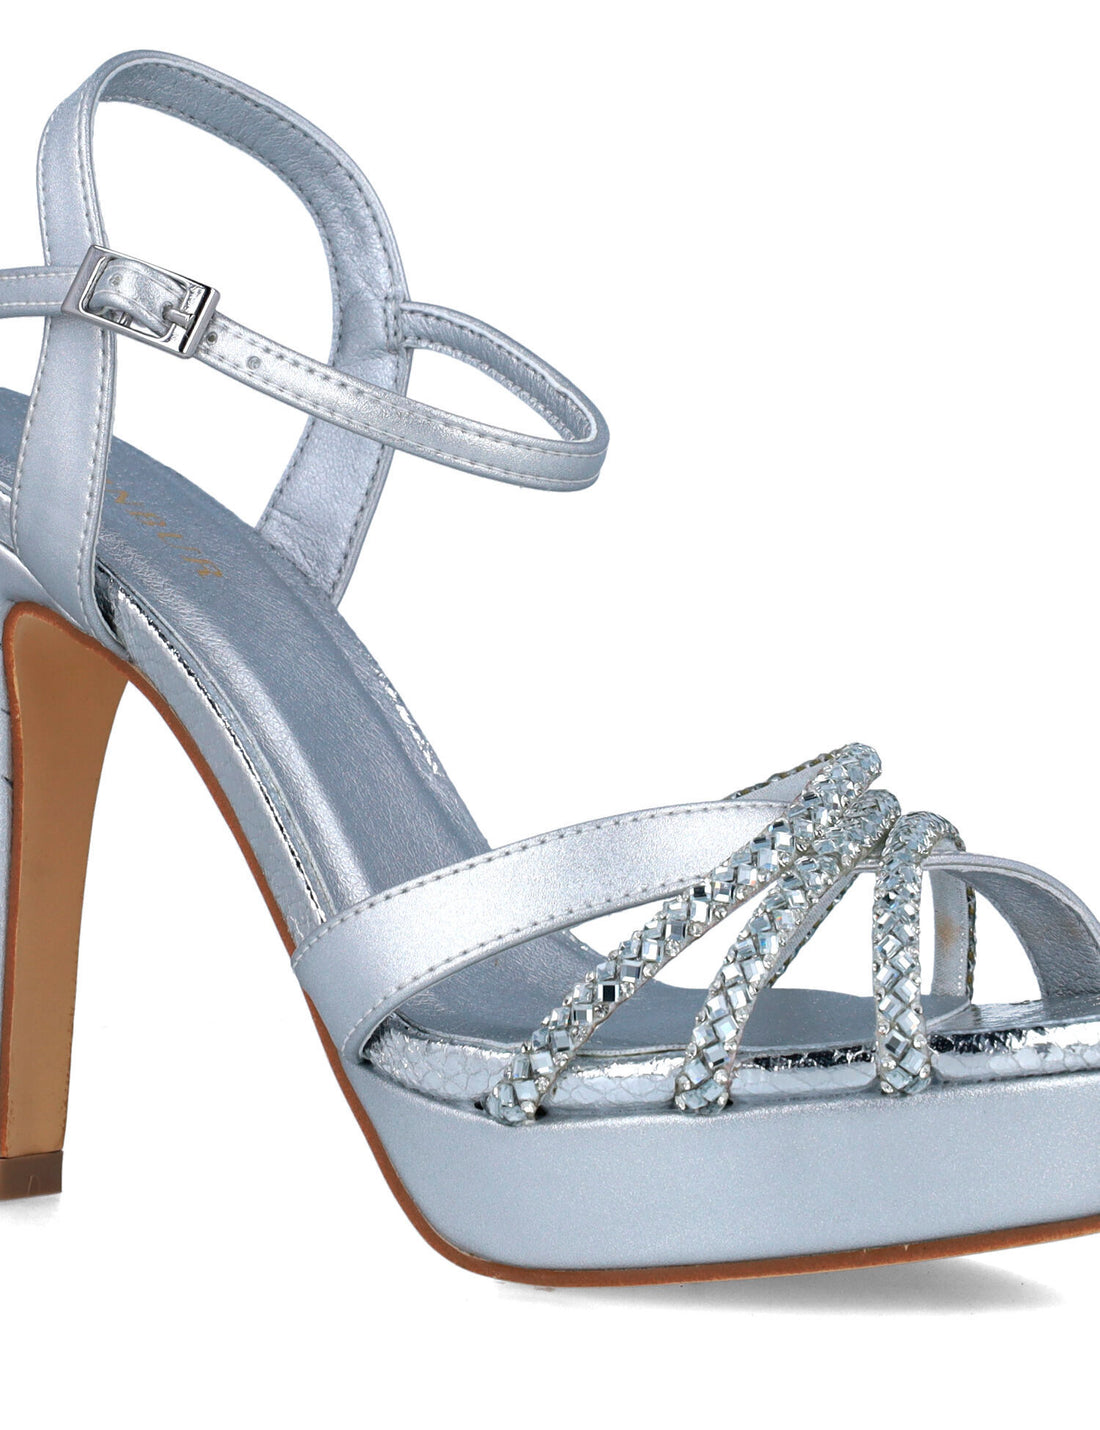 Silver High-Heel Sandals With Ankle Strap_25185_09_02